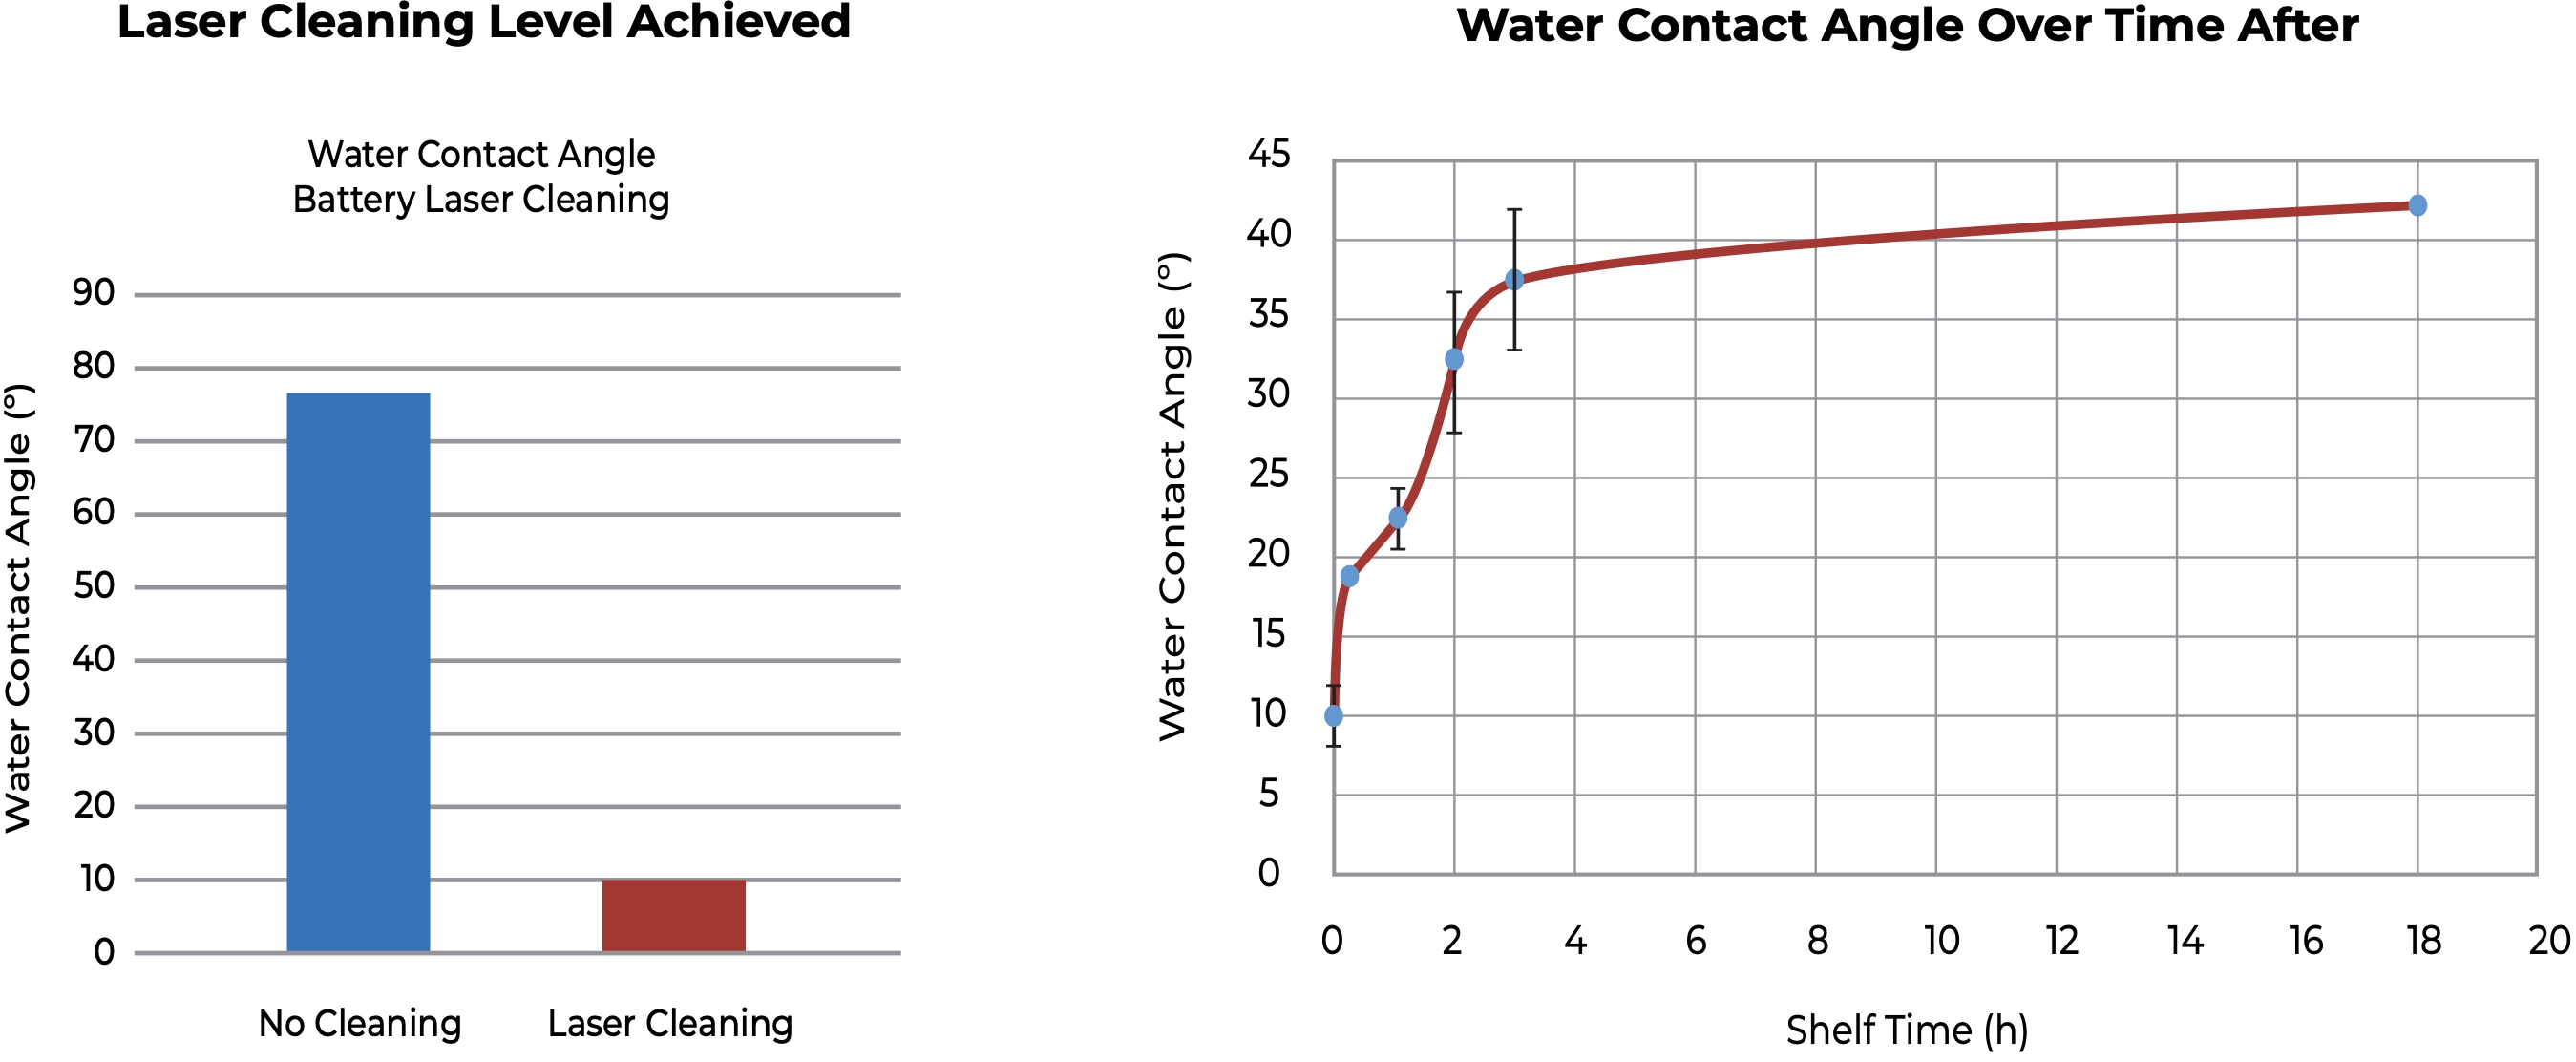 Water contact angle test results